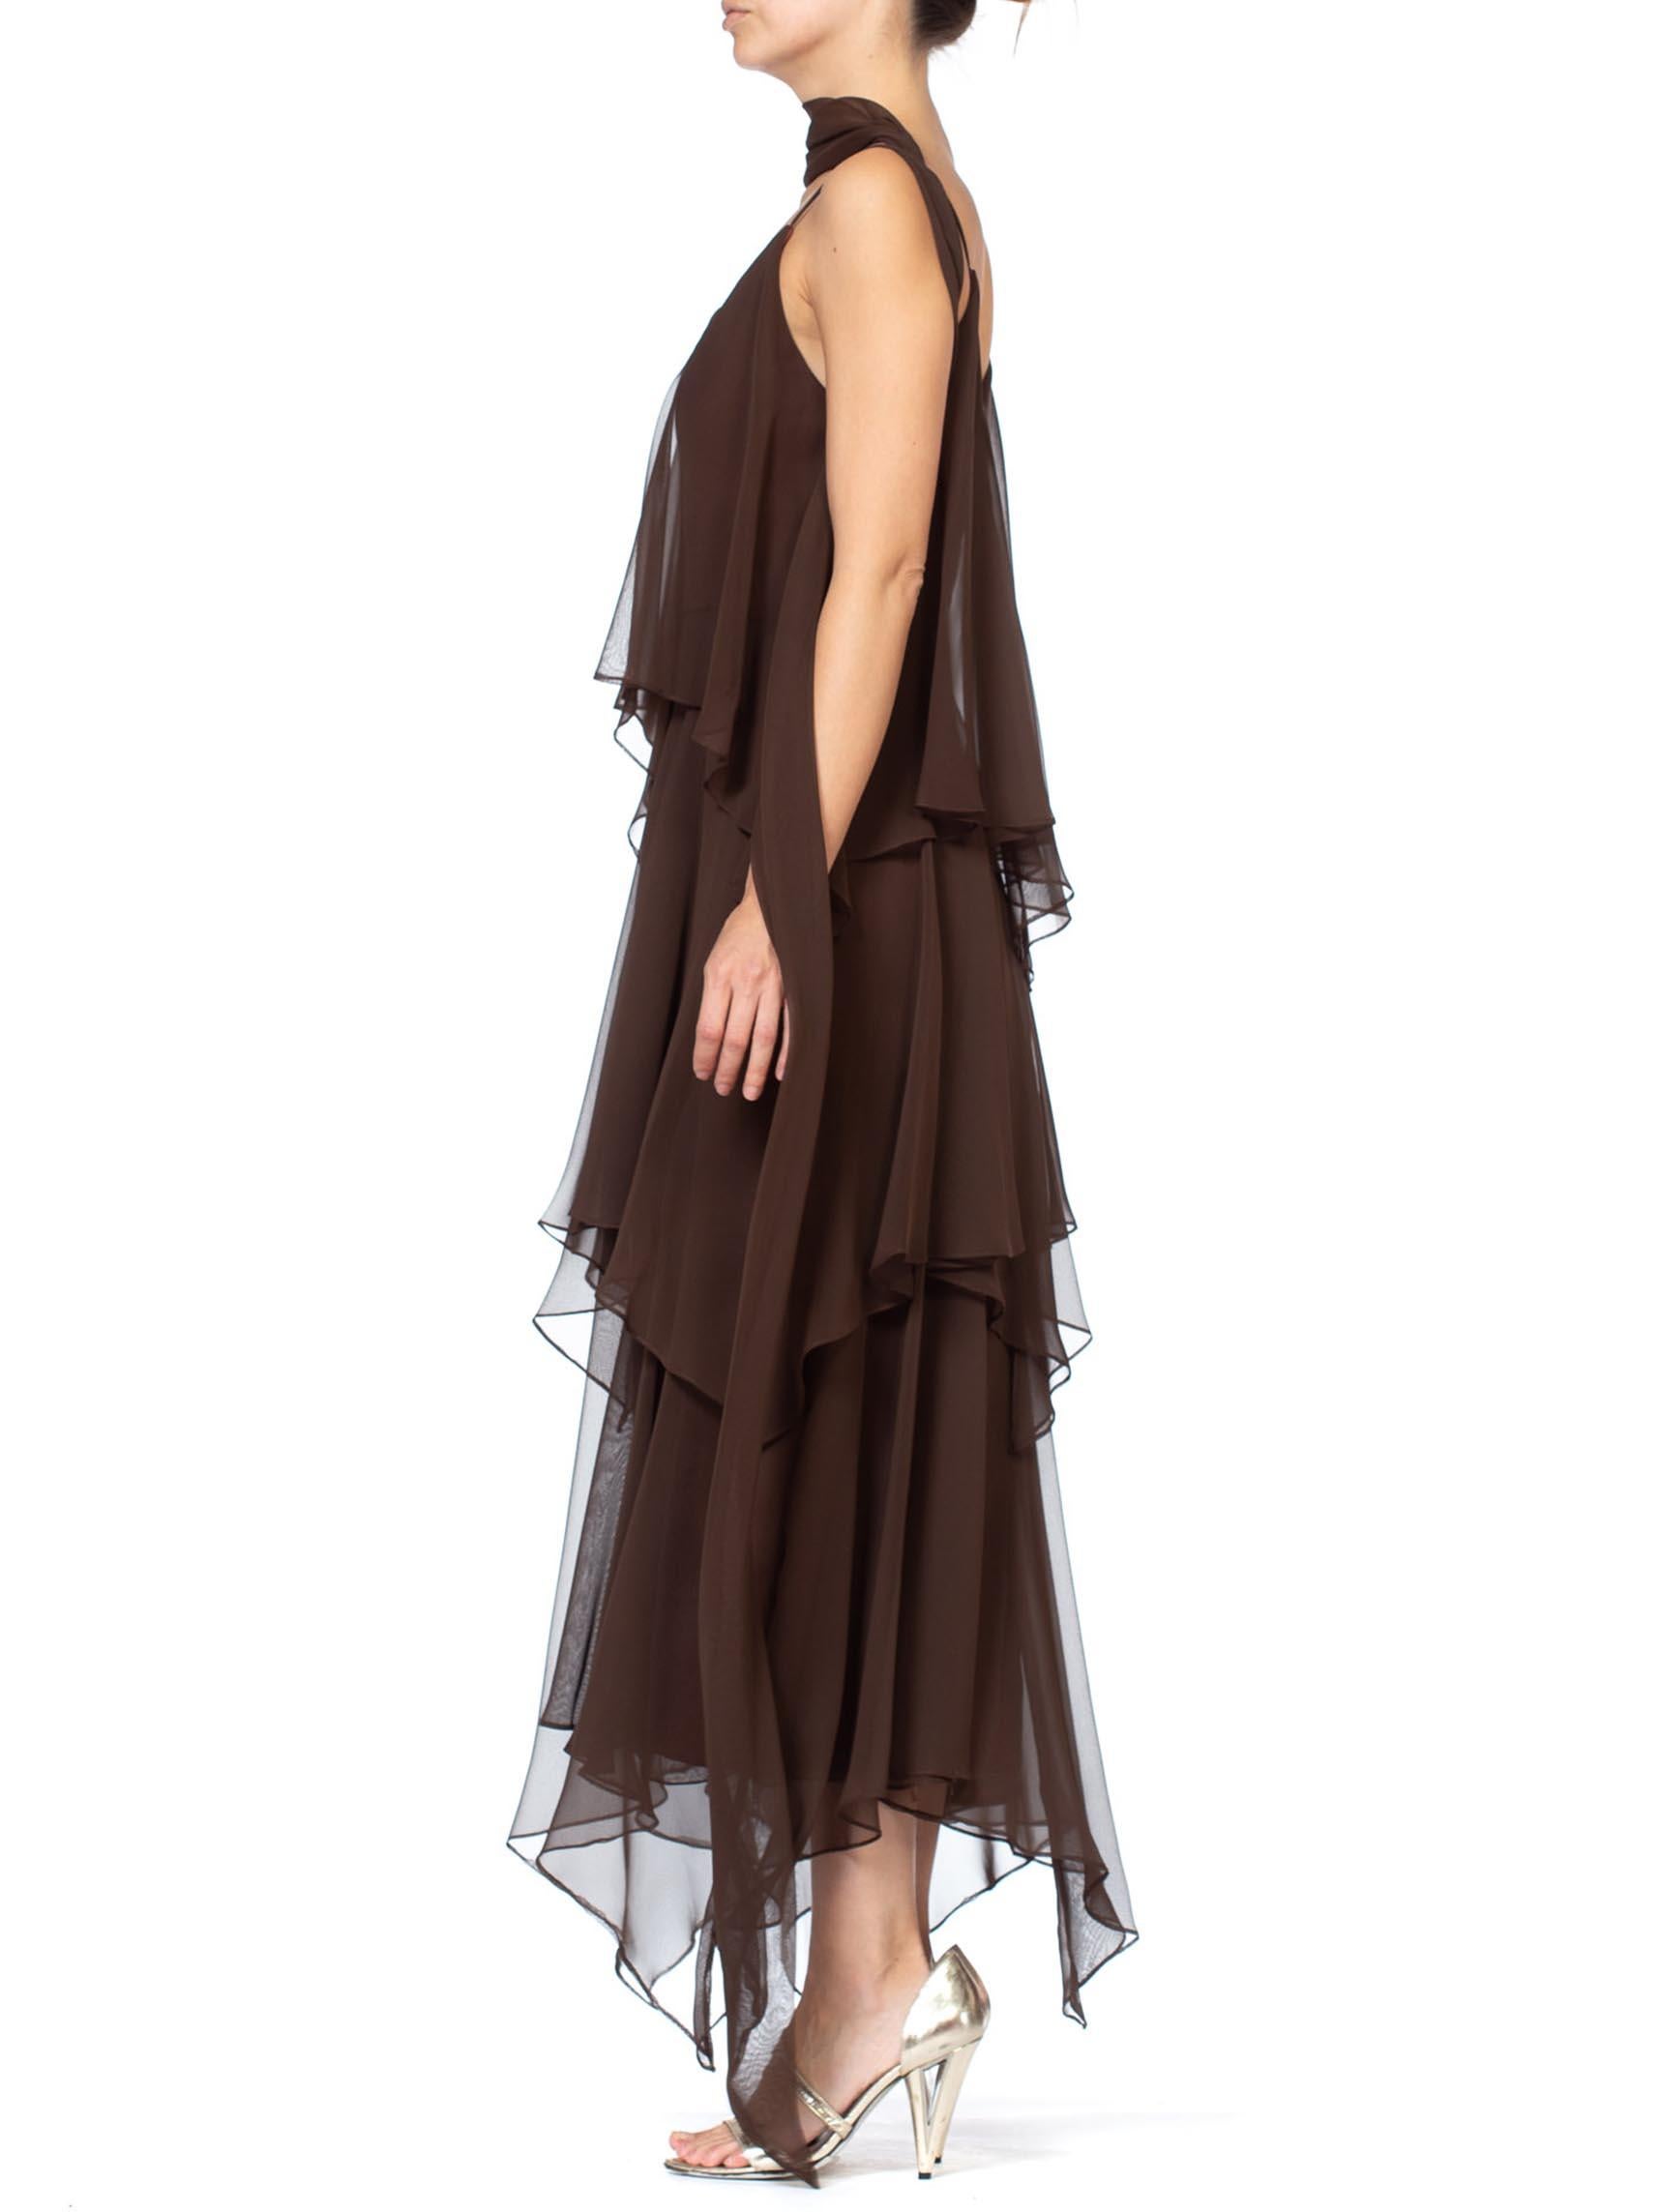 Women's 1970S ANTHONY MUTO Chocolate Brown Polyester Chiffon Disco Flapper Dress With S For Sale